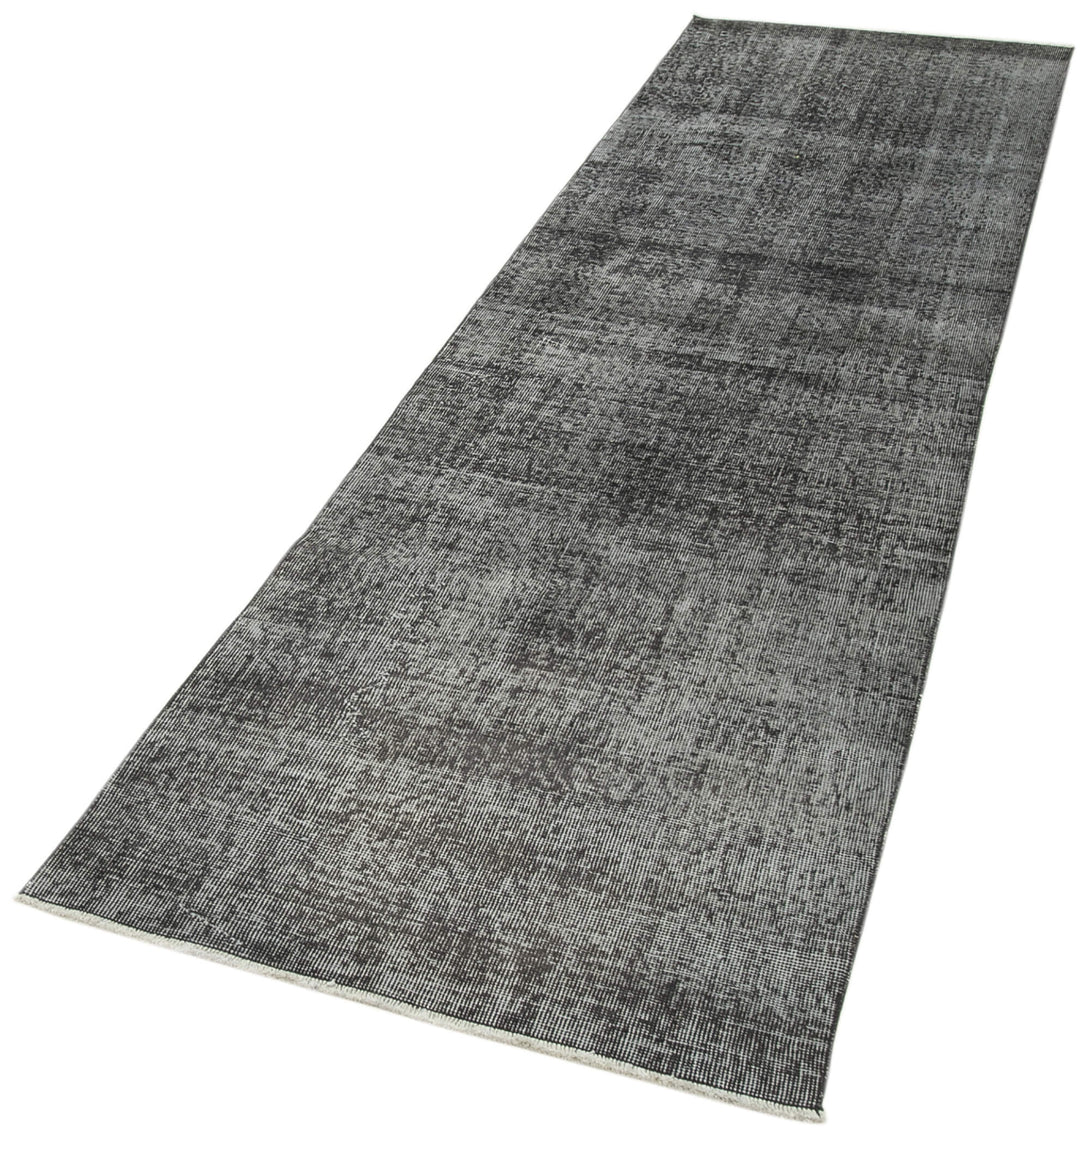 Handmade Overdyed Runner > Design# OL-AC-38177 > Size: 2'-9" x 9'-10", Carpet Culture Rugs, Handmade Rugs, NYC Rugs, New Rugs, Shop Rugs, Rug Store, Outlet Rugs, SoHo Rugs, Rugs in USA